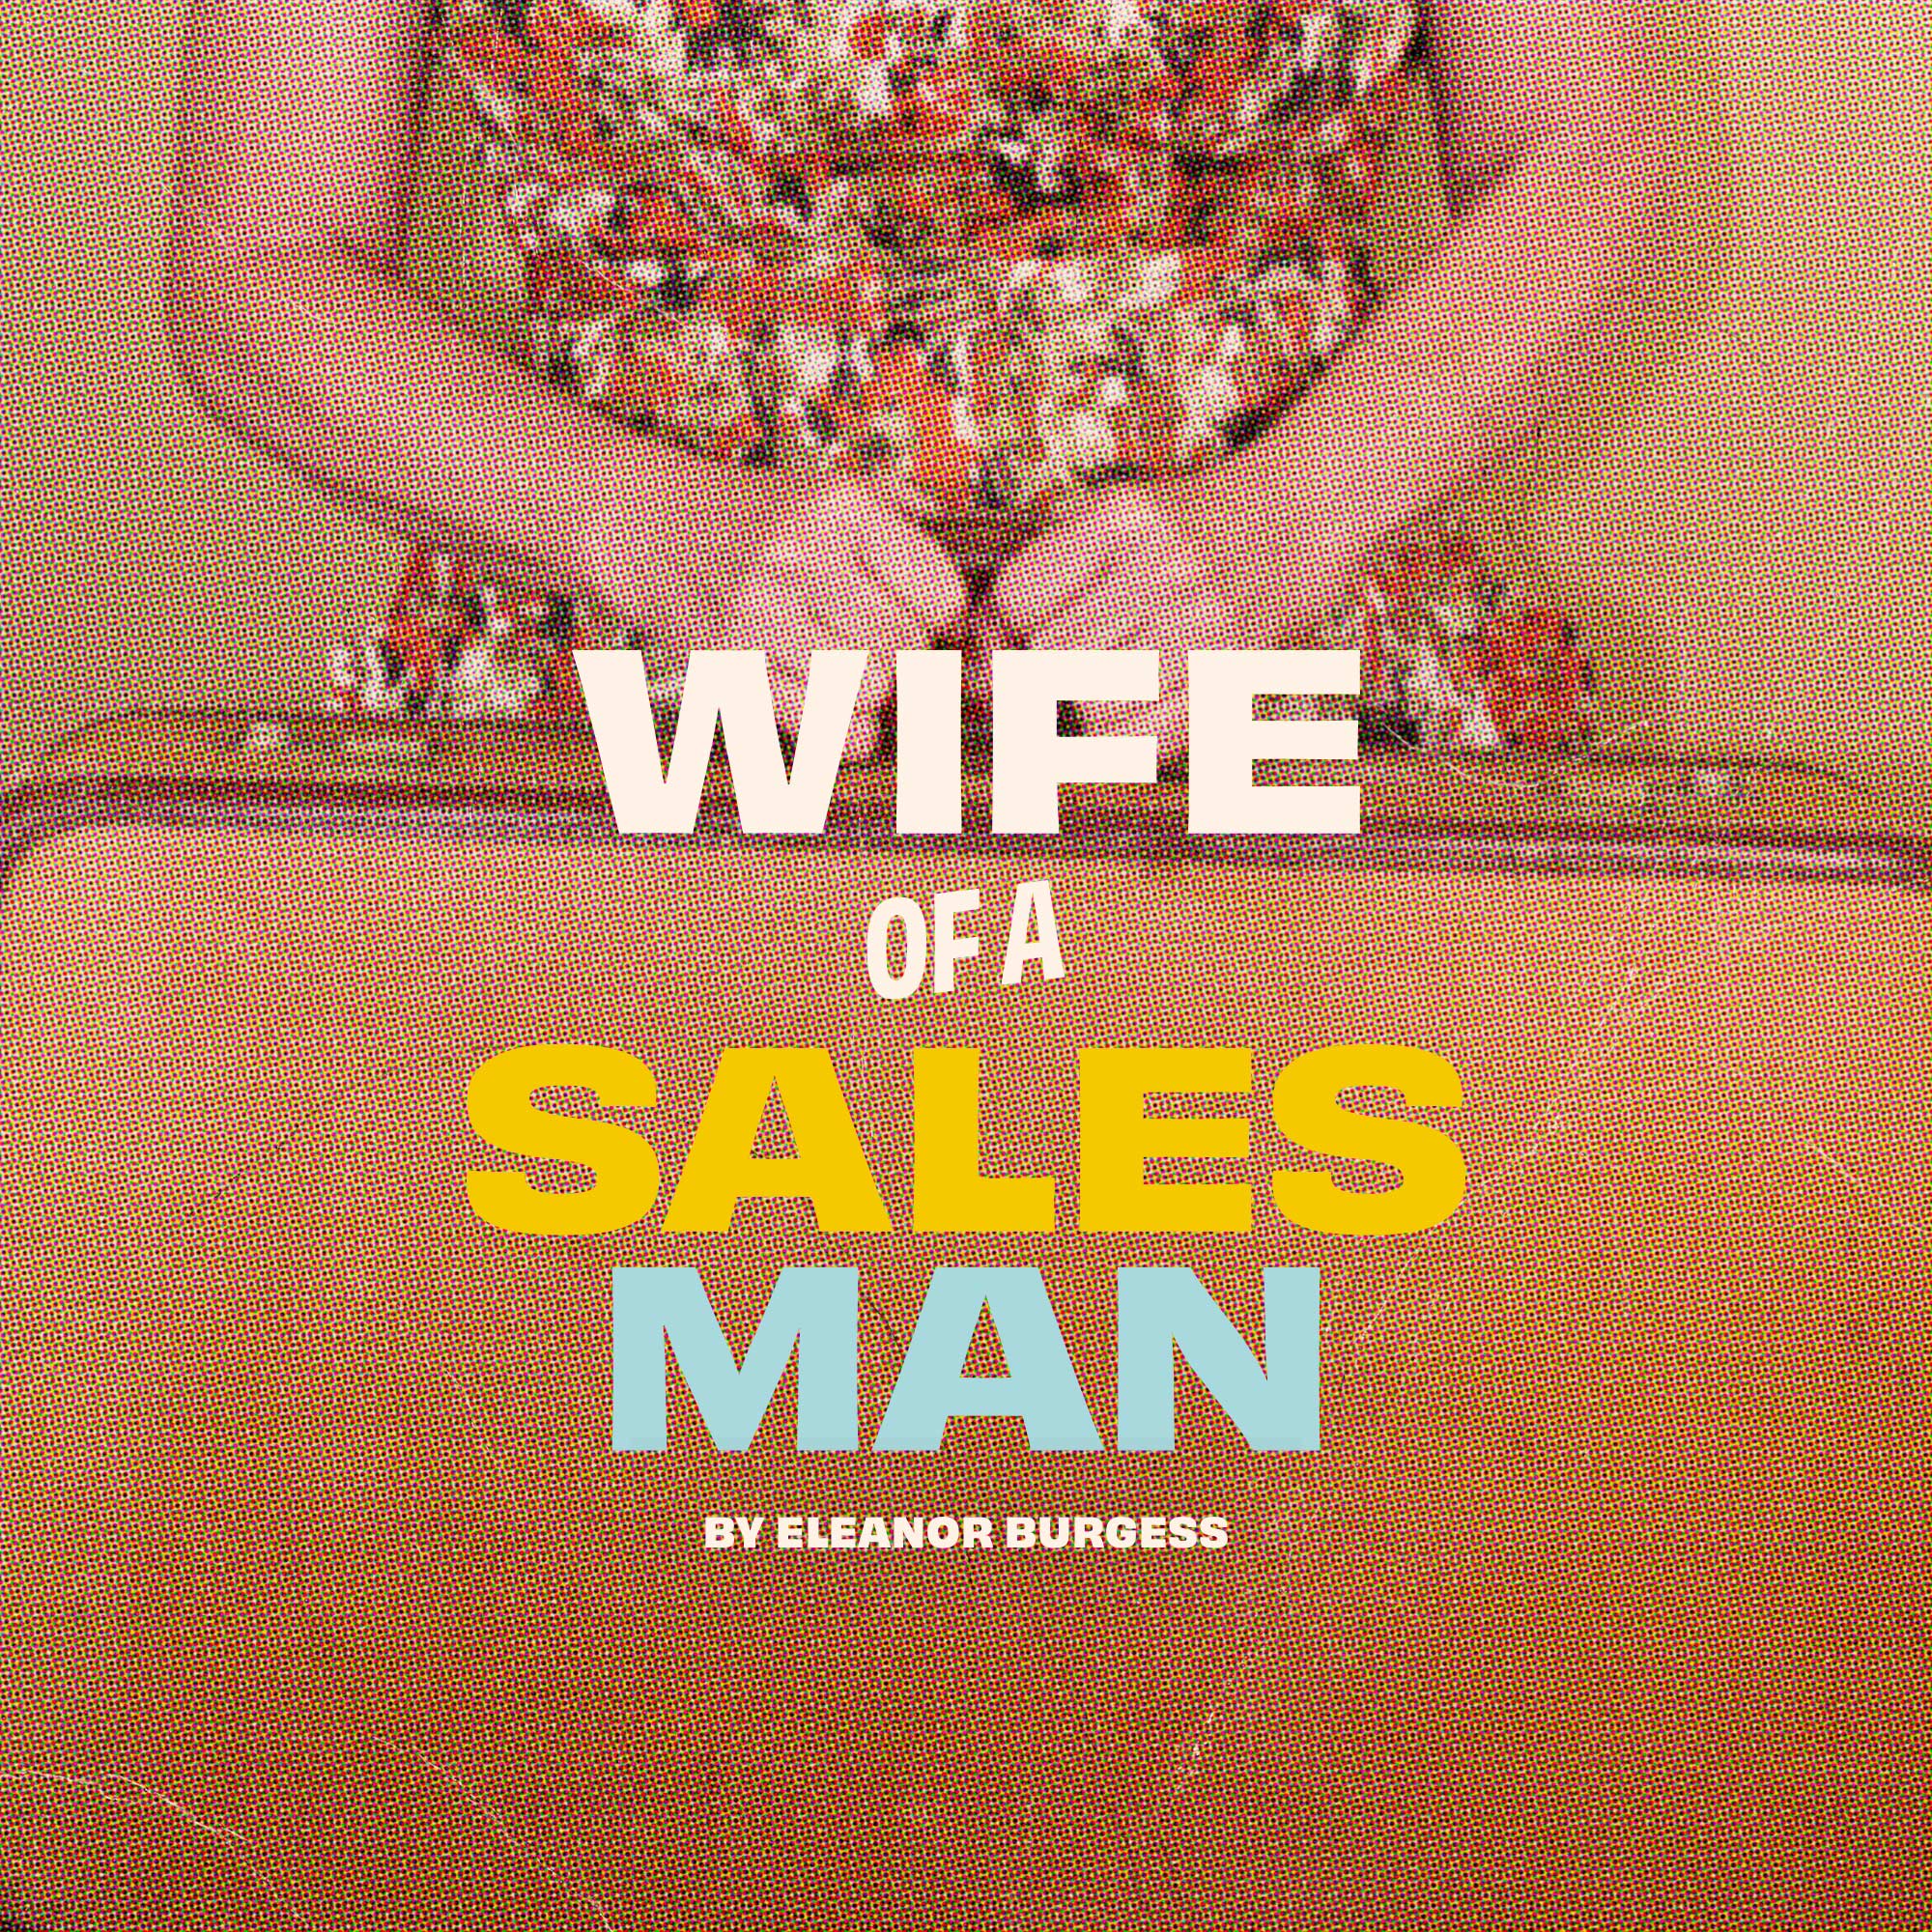 Wife of a Salesman Contemporary Theatre of Ohio Play